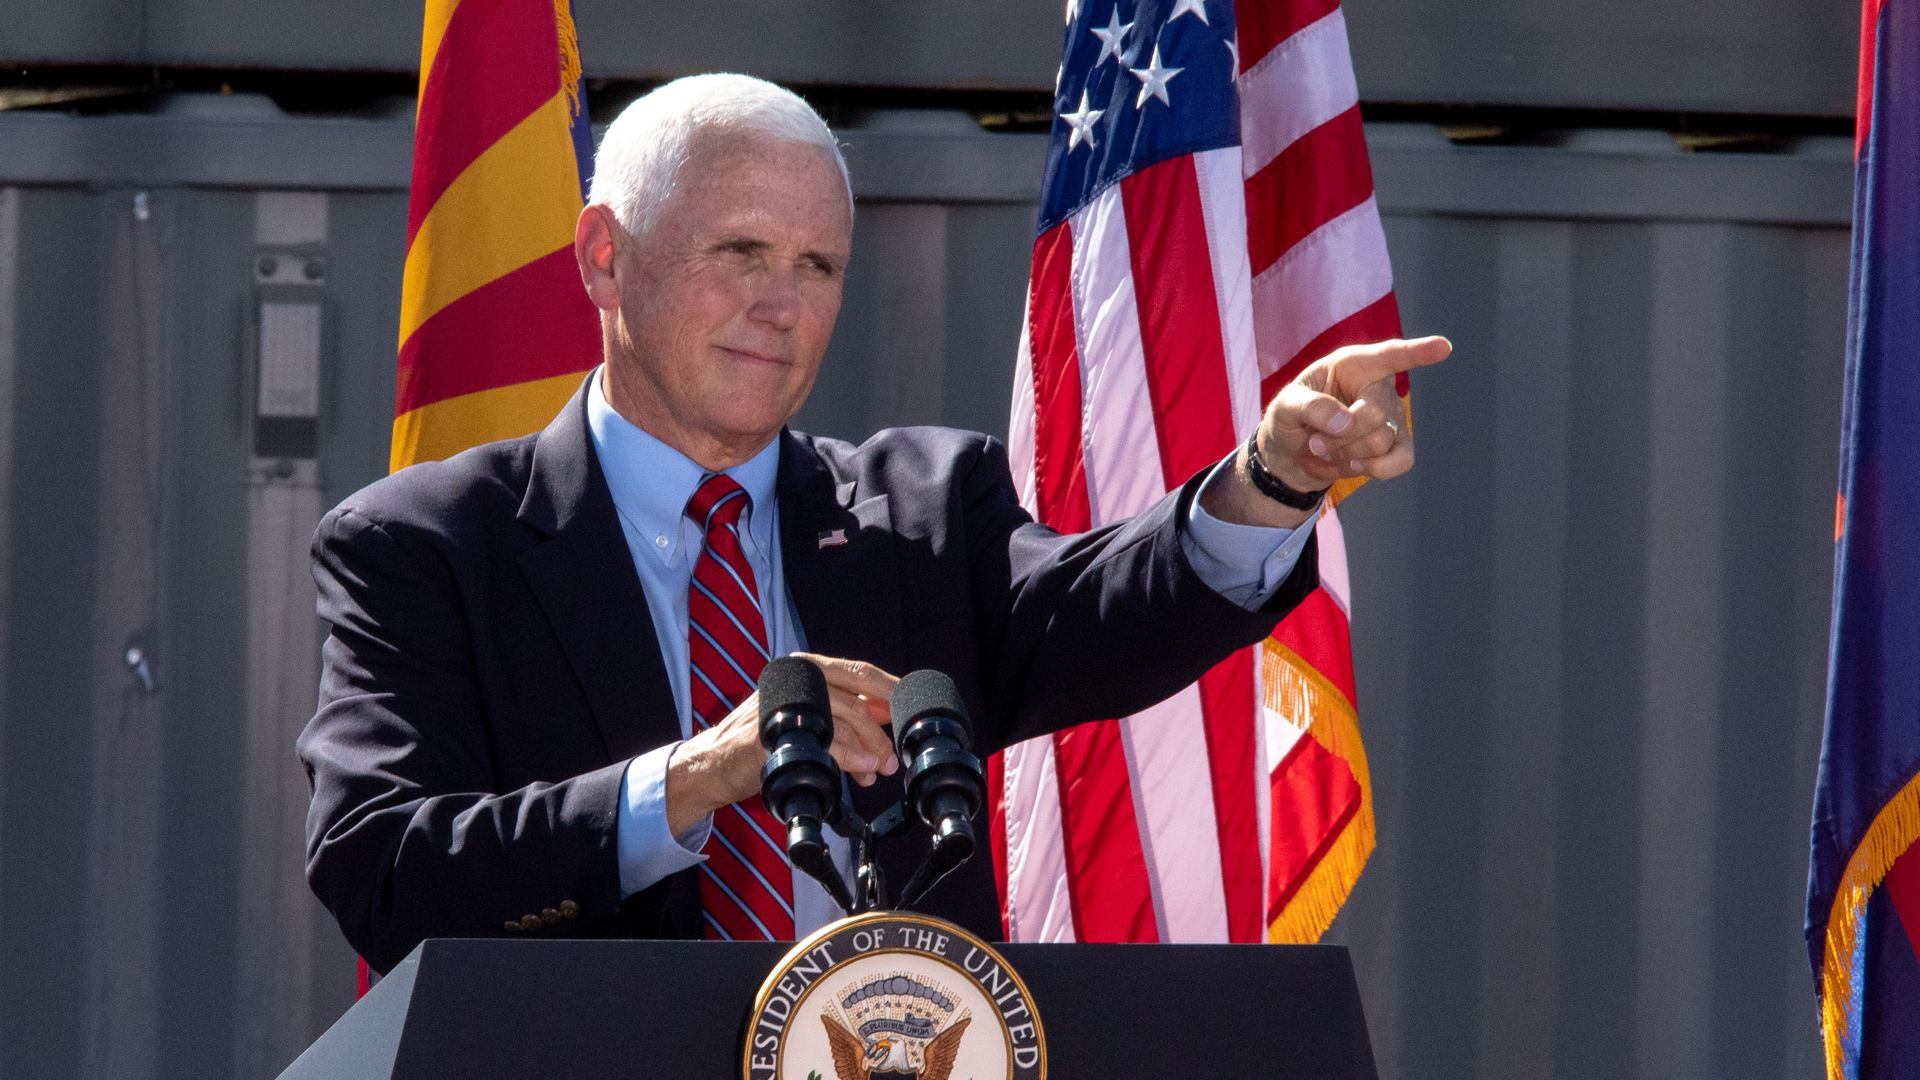 Vice President Mike Pence points to his left during a rally in Peoria Arizona in October 2020